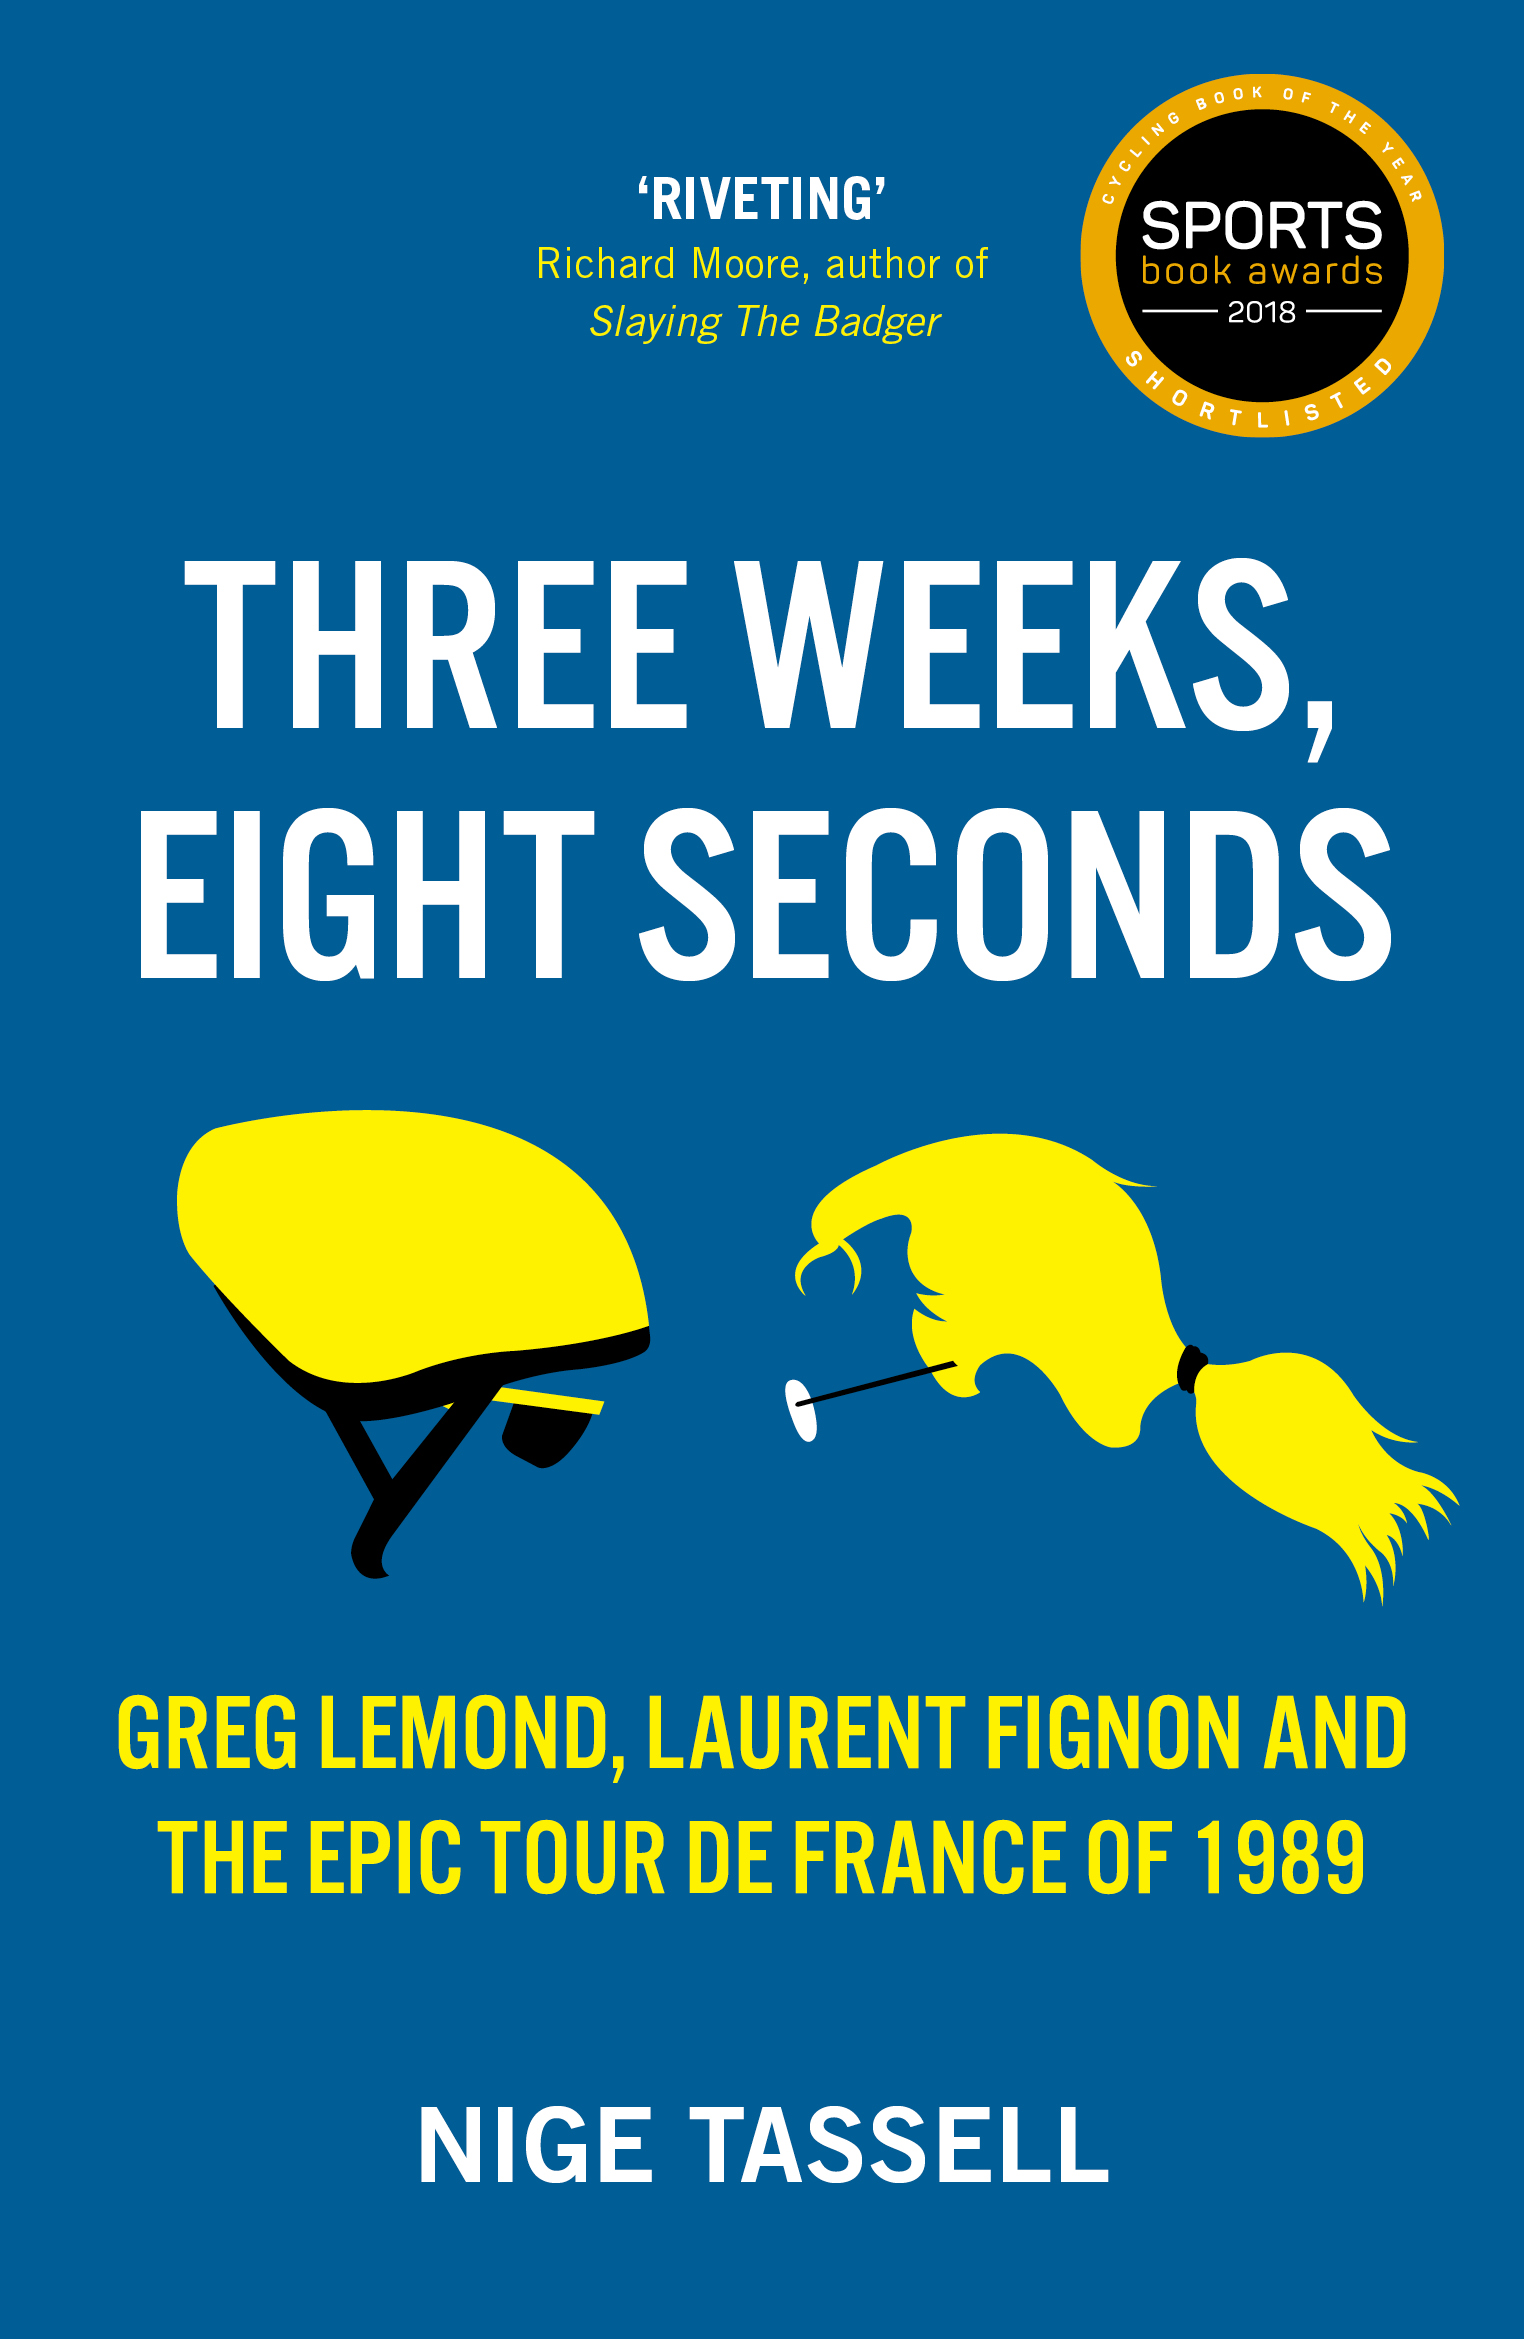 Three Weeks, Eight Seconds: The Epic Tour de France of 1989 by Nige Tassell